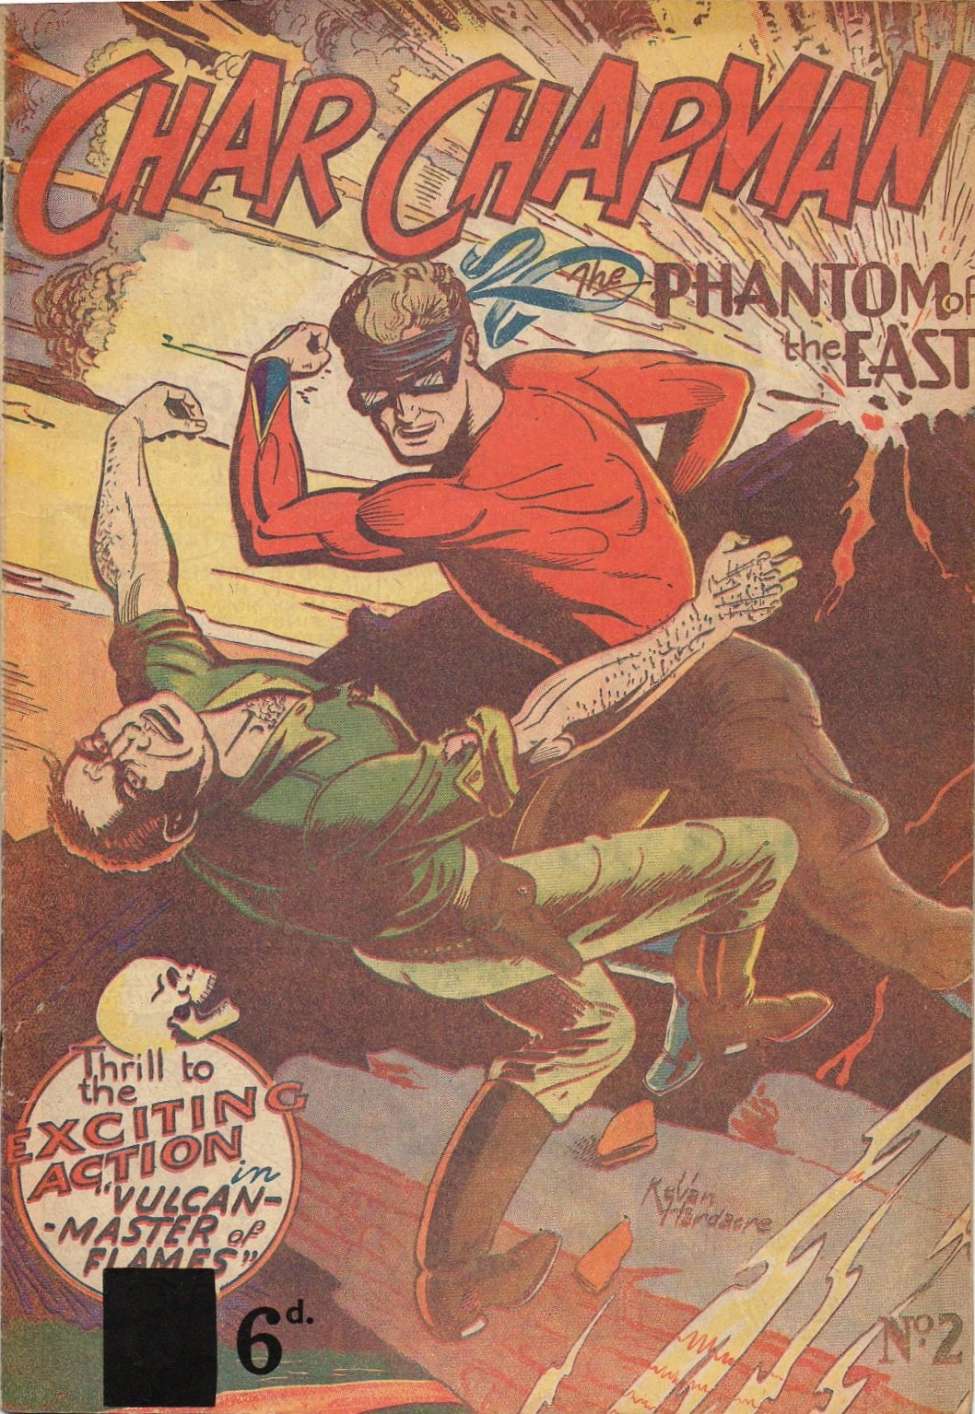 Book Cover For Char Chapman, The Phantom of the East 2